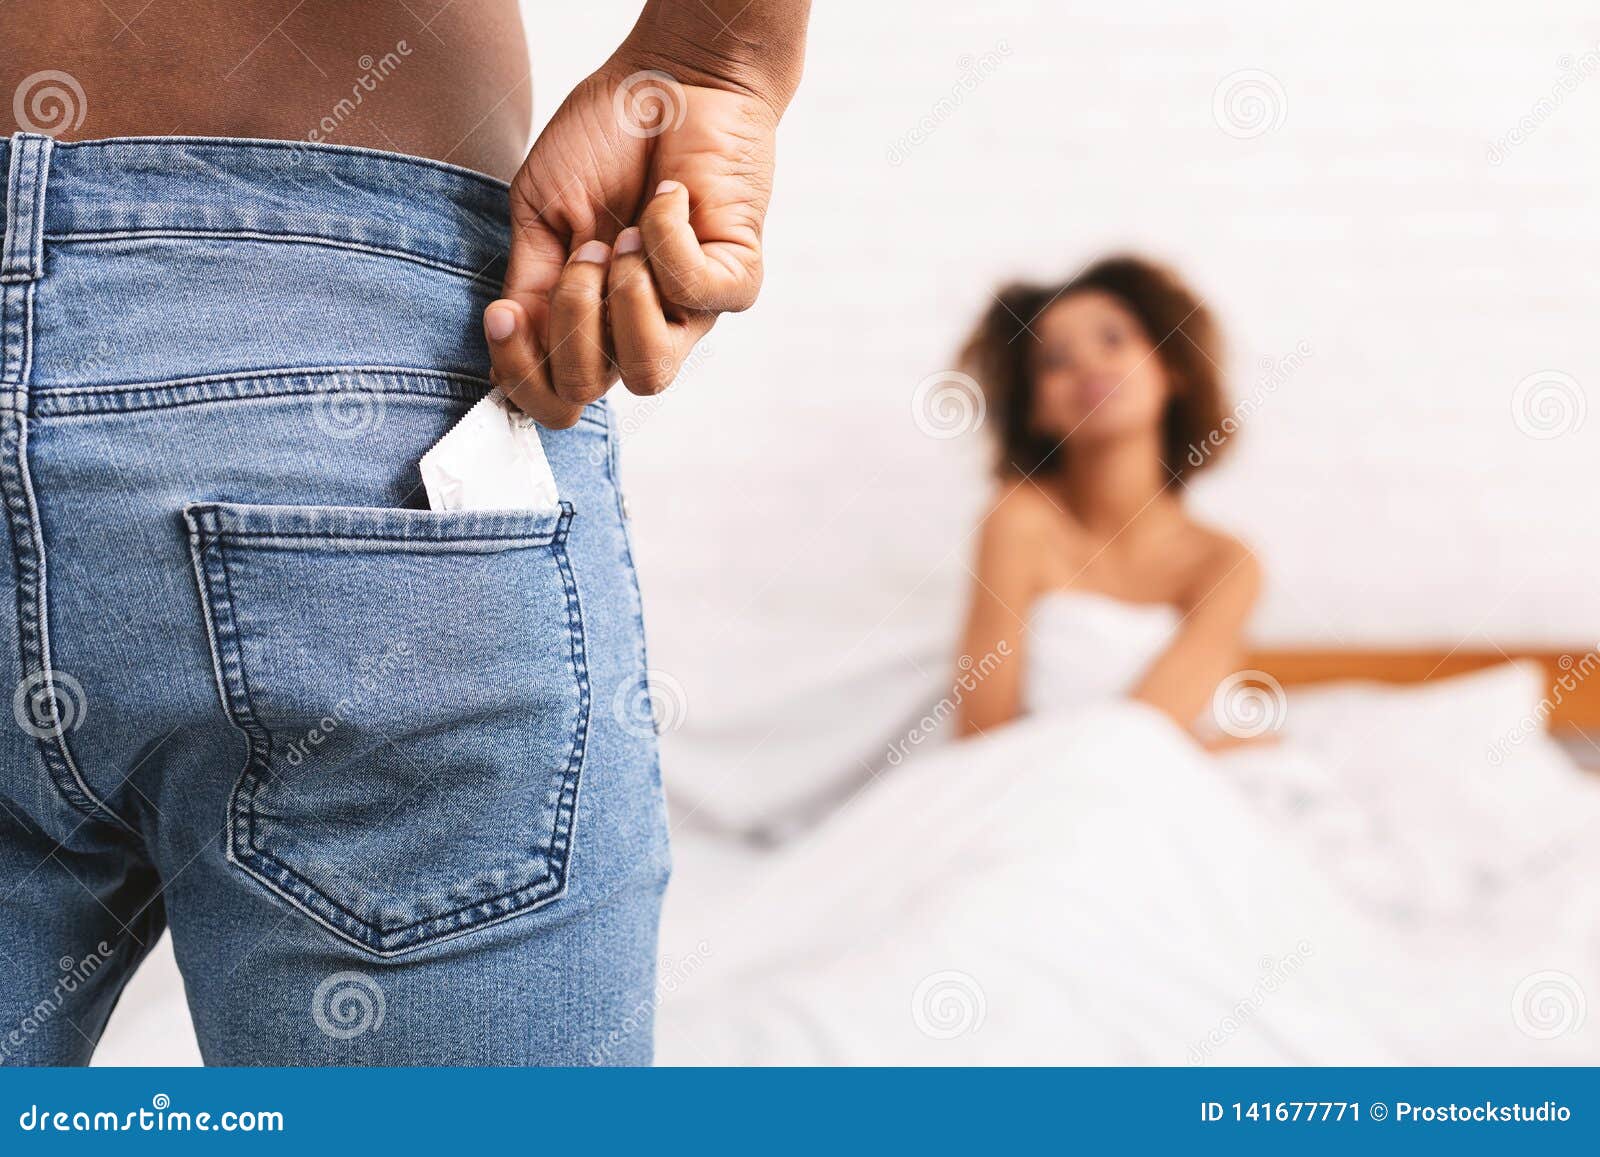 Man Taking Condom from Jeans, Woman Waiting in Bed Stock Image